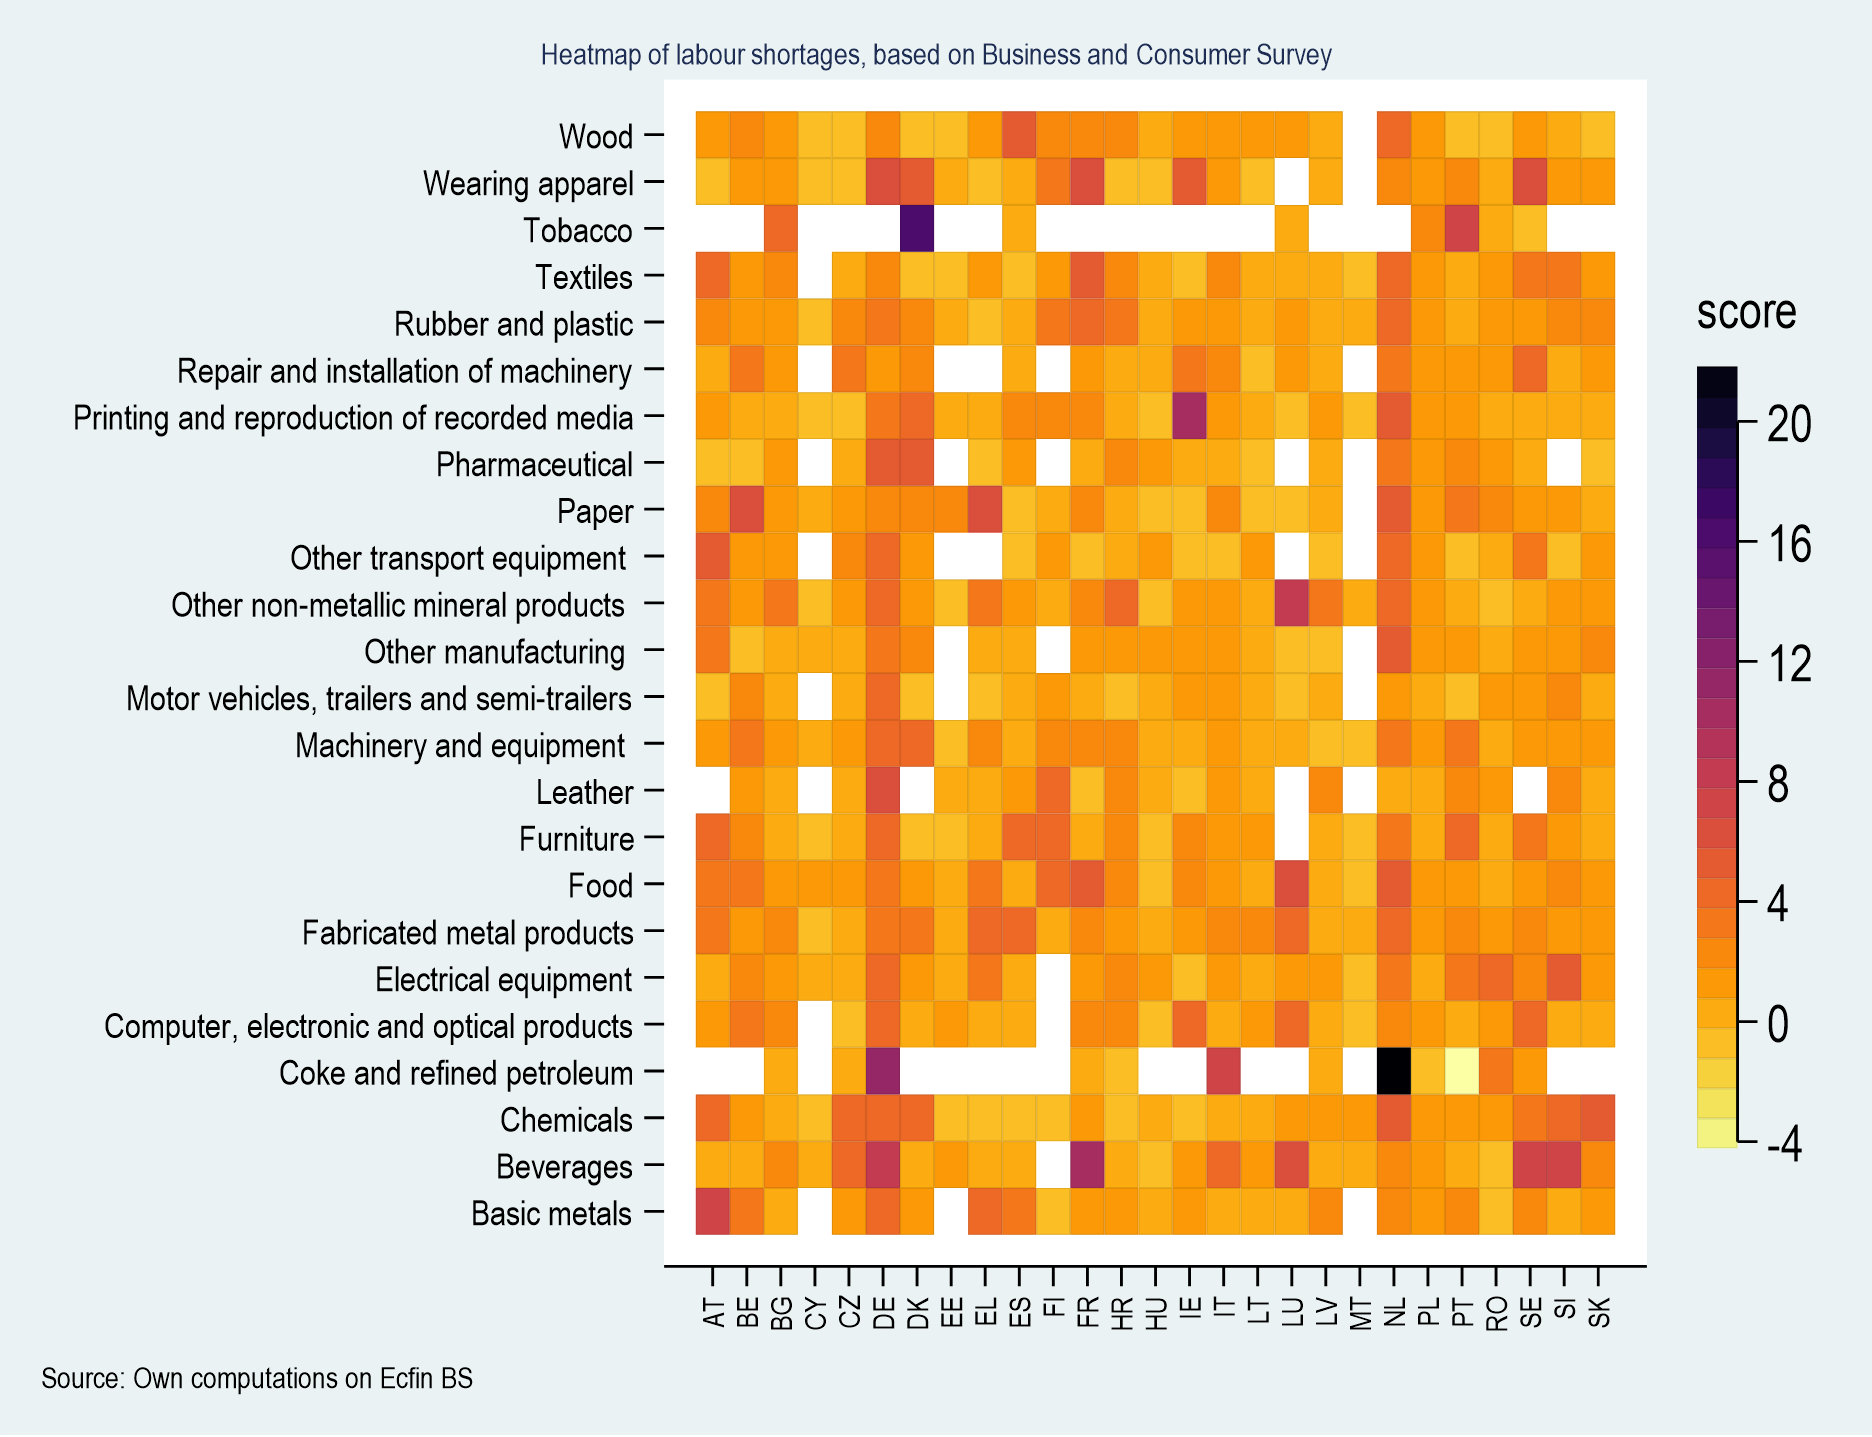 Heatmap of labour shortages in industry, 2022Q4